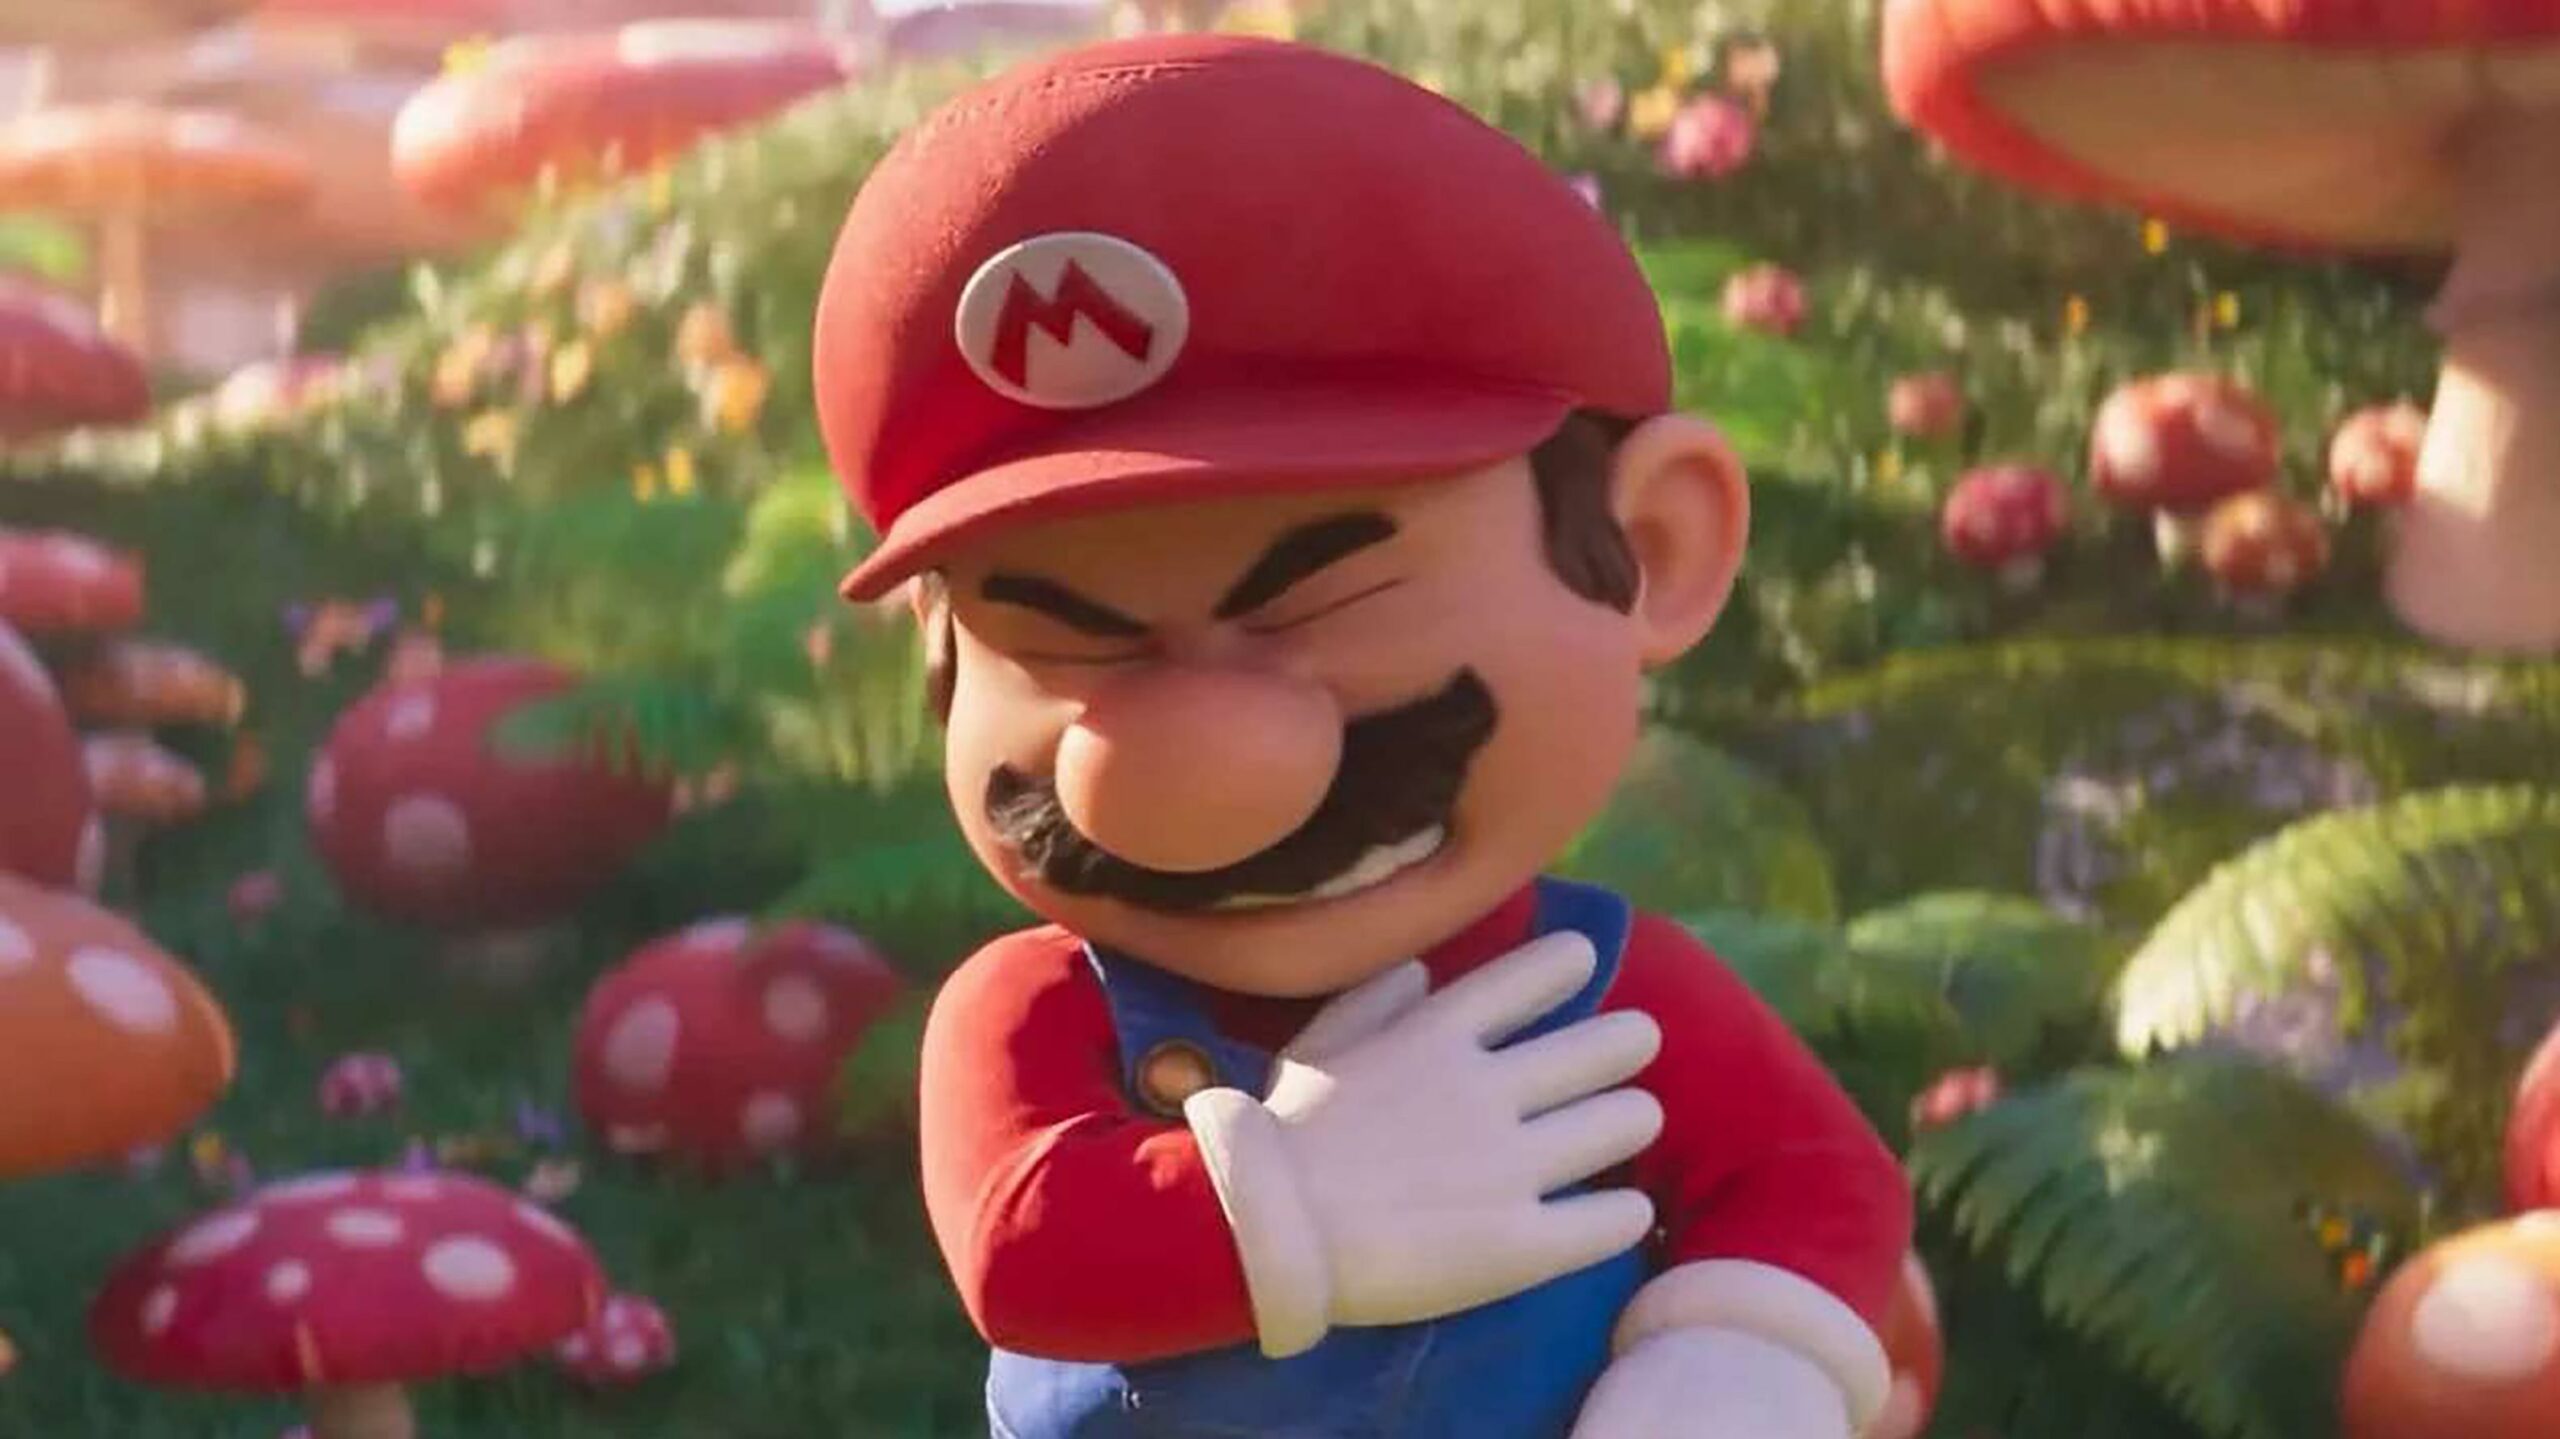 Mario clutching his chest in pain in The Super Mario Bros. Movie